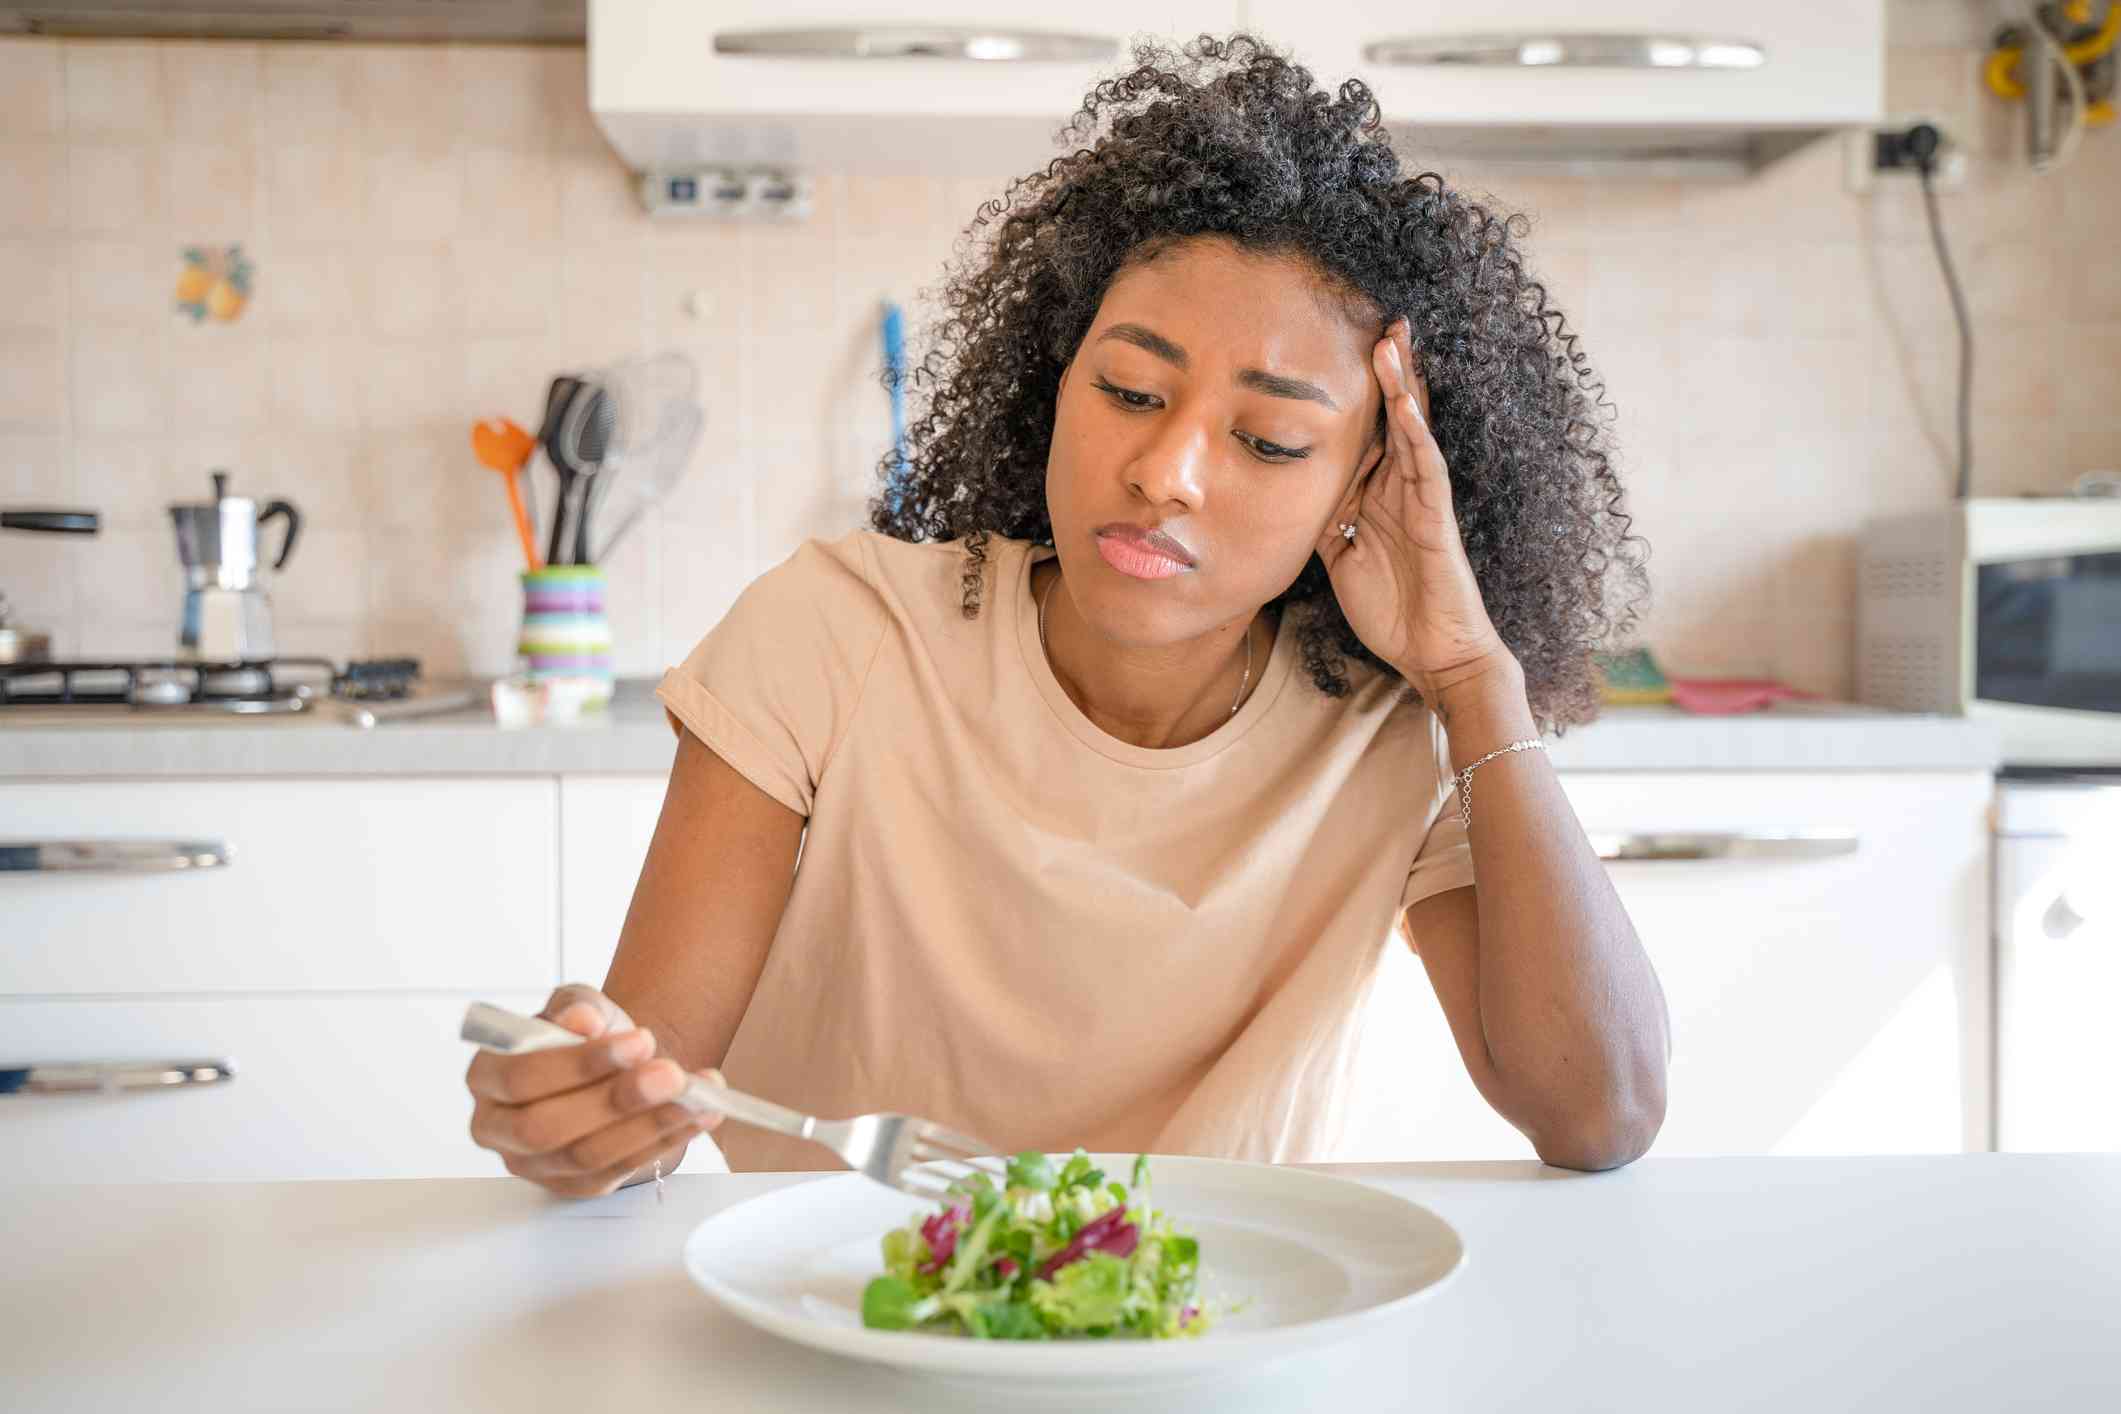 A woman in a tan shirt sits at the kitchen table and picks at her food while resting her head in her hand with a sad expression.